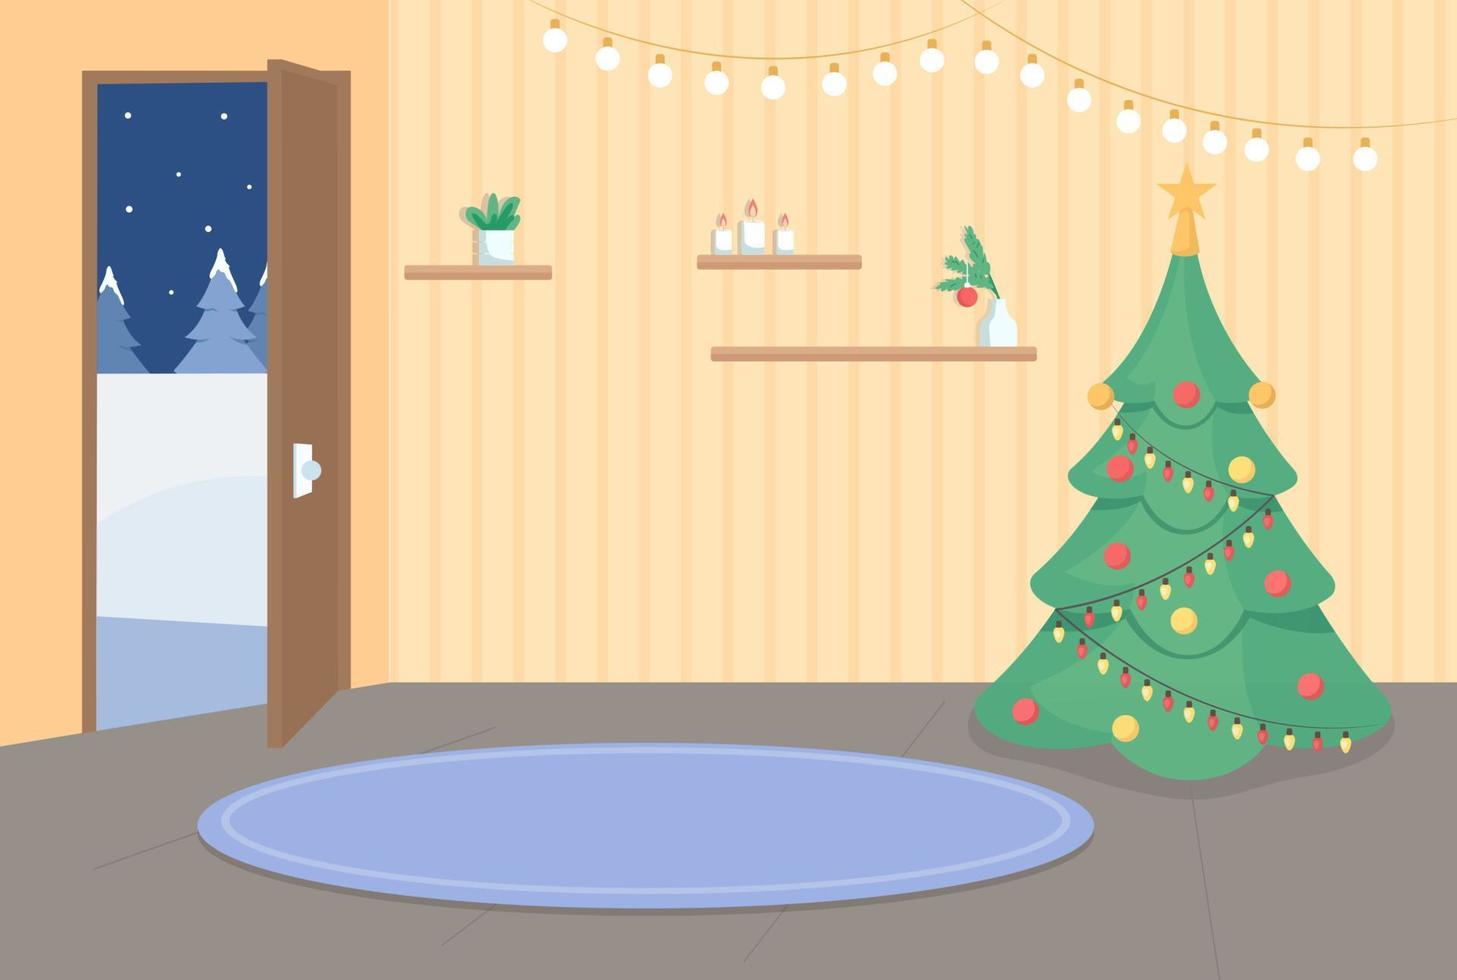 Home entrance on Christmas flat color vector illustration. Xmas tree in corner. Decorated apartment. House hallway 2D cartoon interior with opened door to winter evening on background